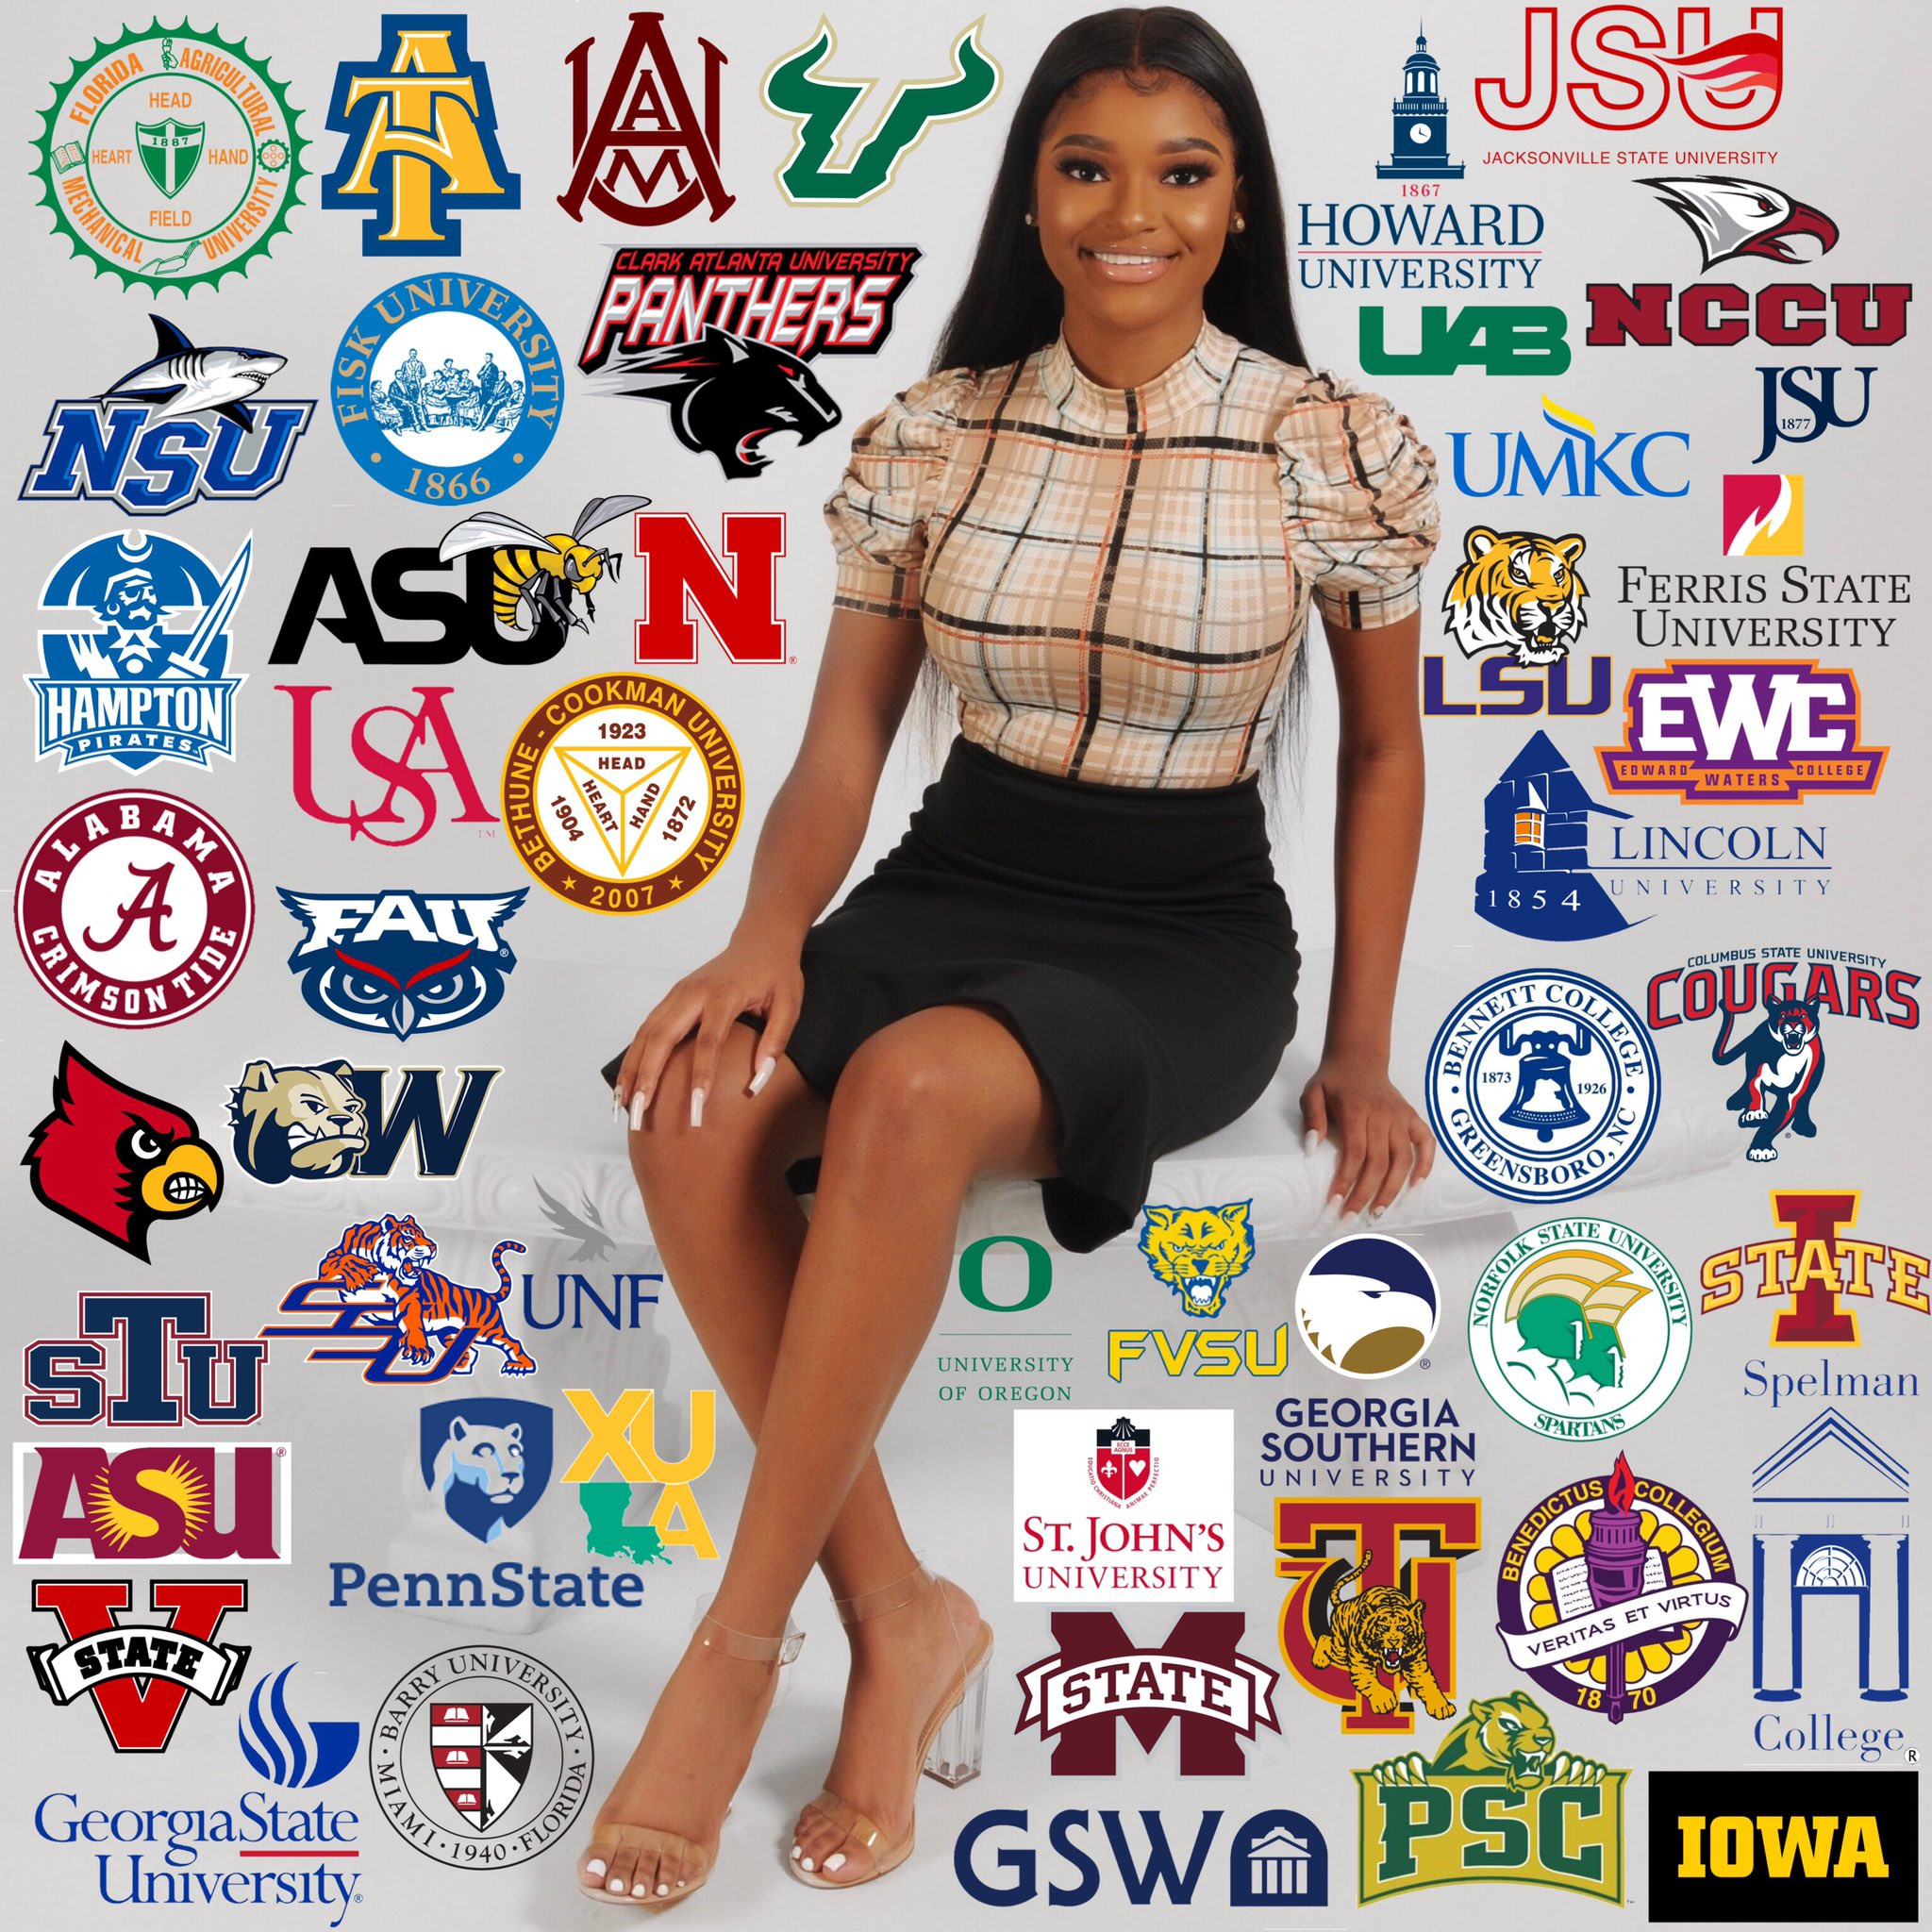 The young lady got admitted into 50 US universities